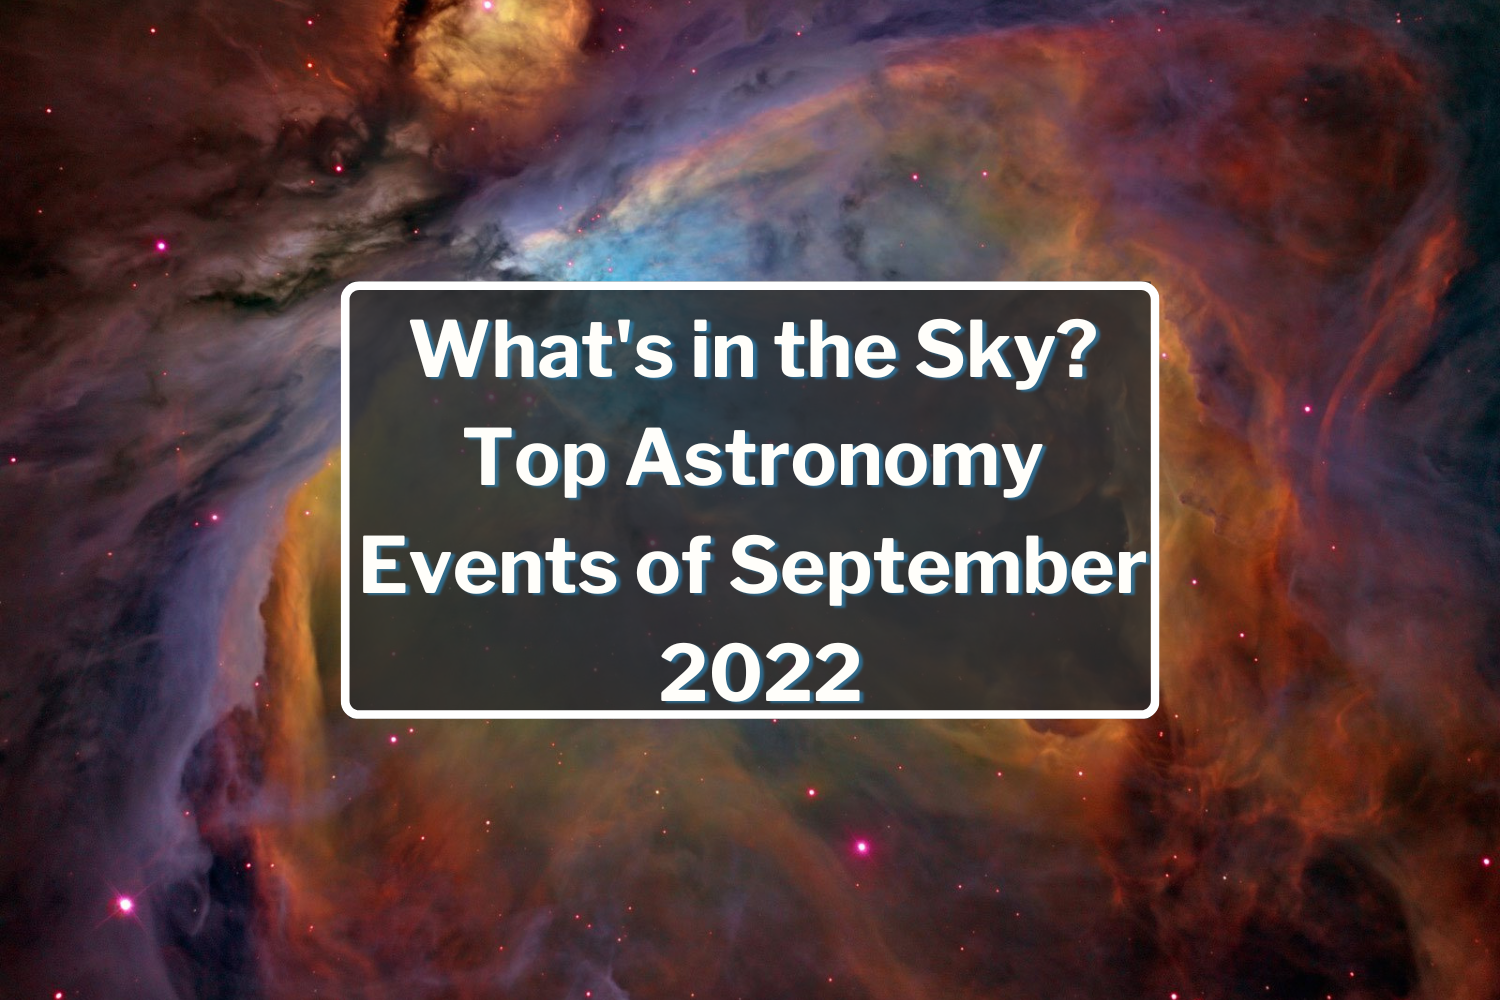 What's in the Sky? Top Astronomy Events of September 2022